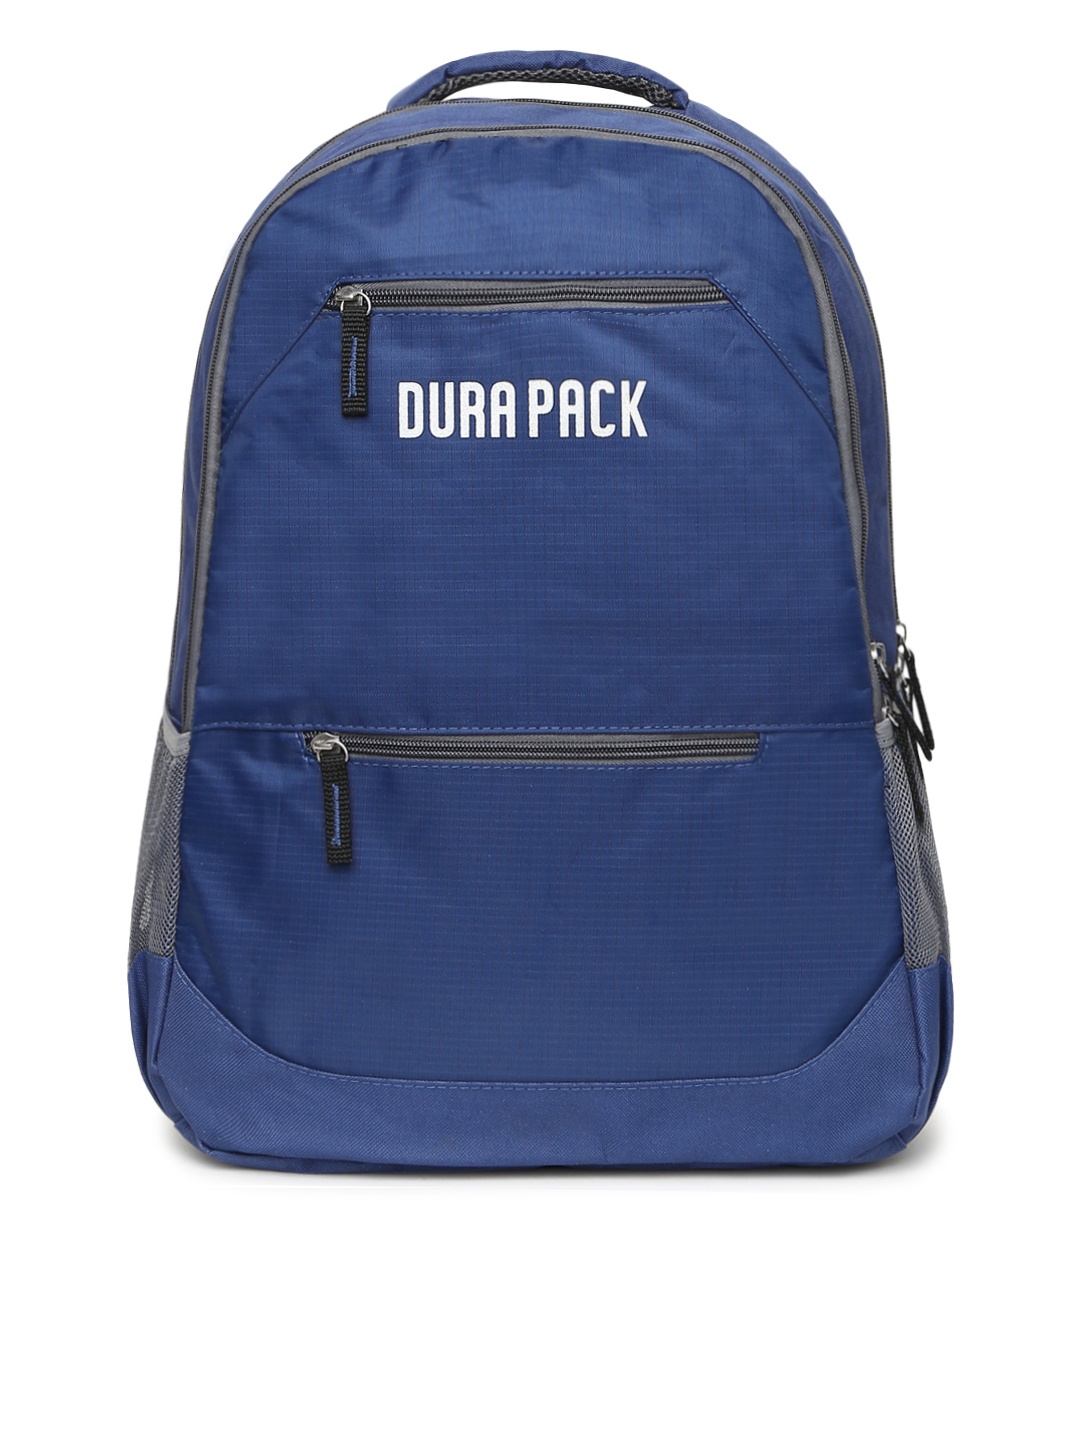 Durapack Unisex Blue Solid Backpack - buy at the price of $20.81 in ...